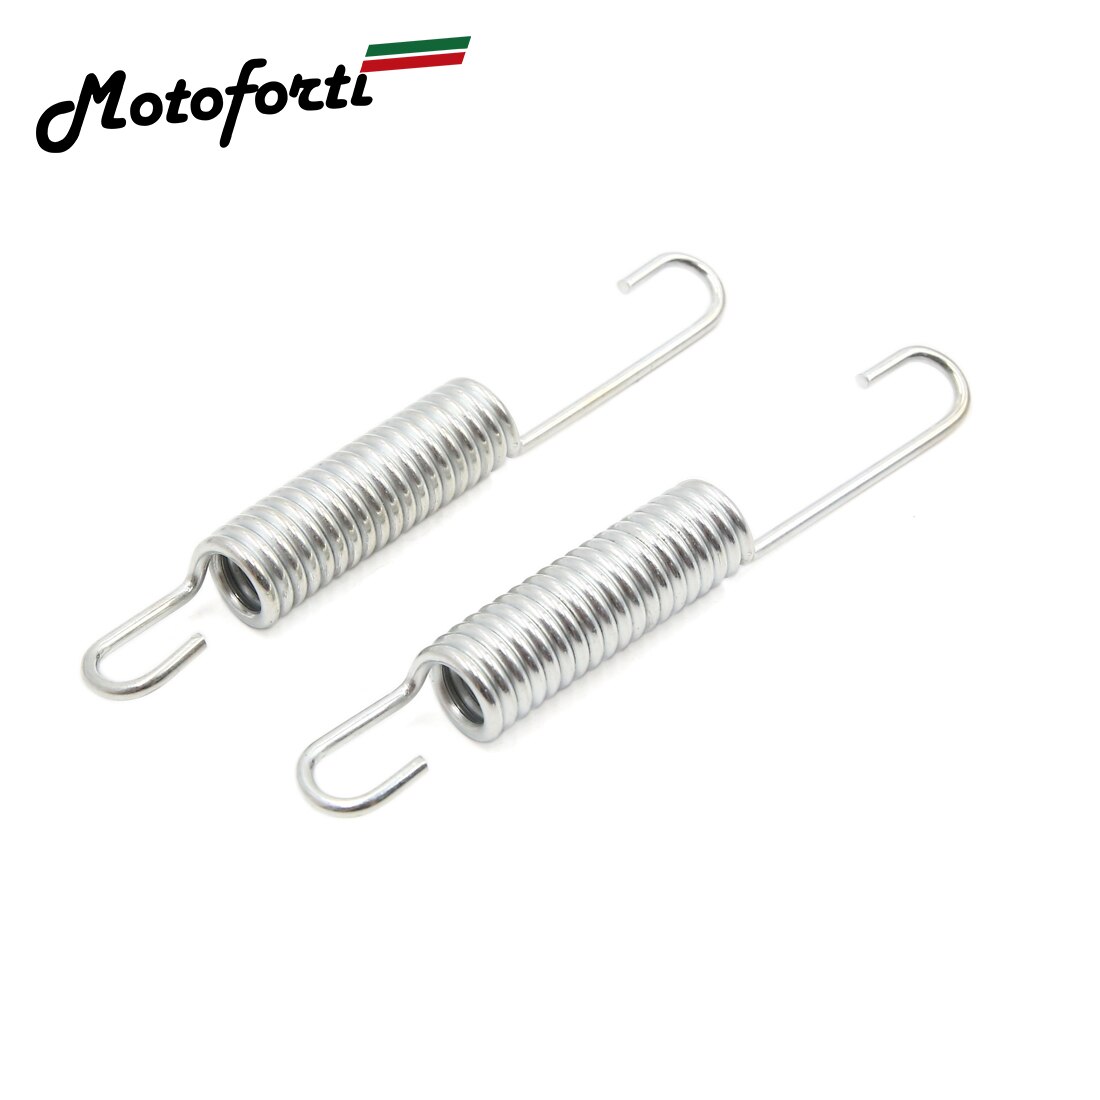 Motoforti- bike. stand, metal, silver tone, side stand springs,Gs125 gn125 for,2 piece 